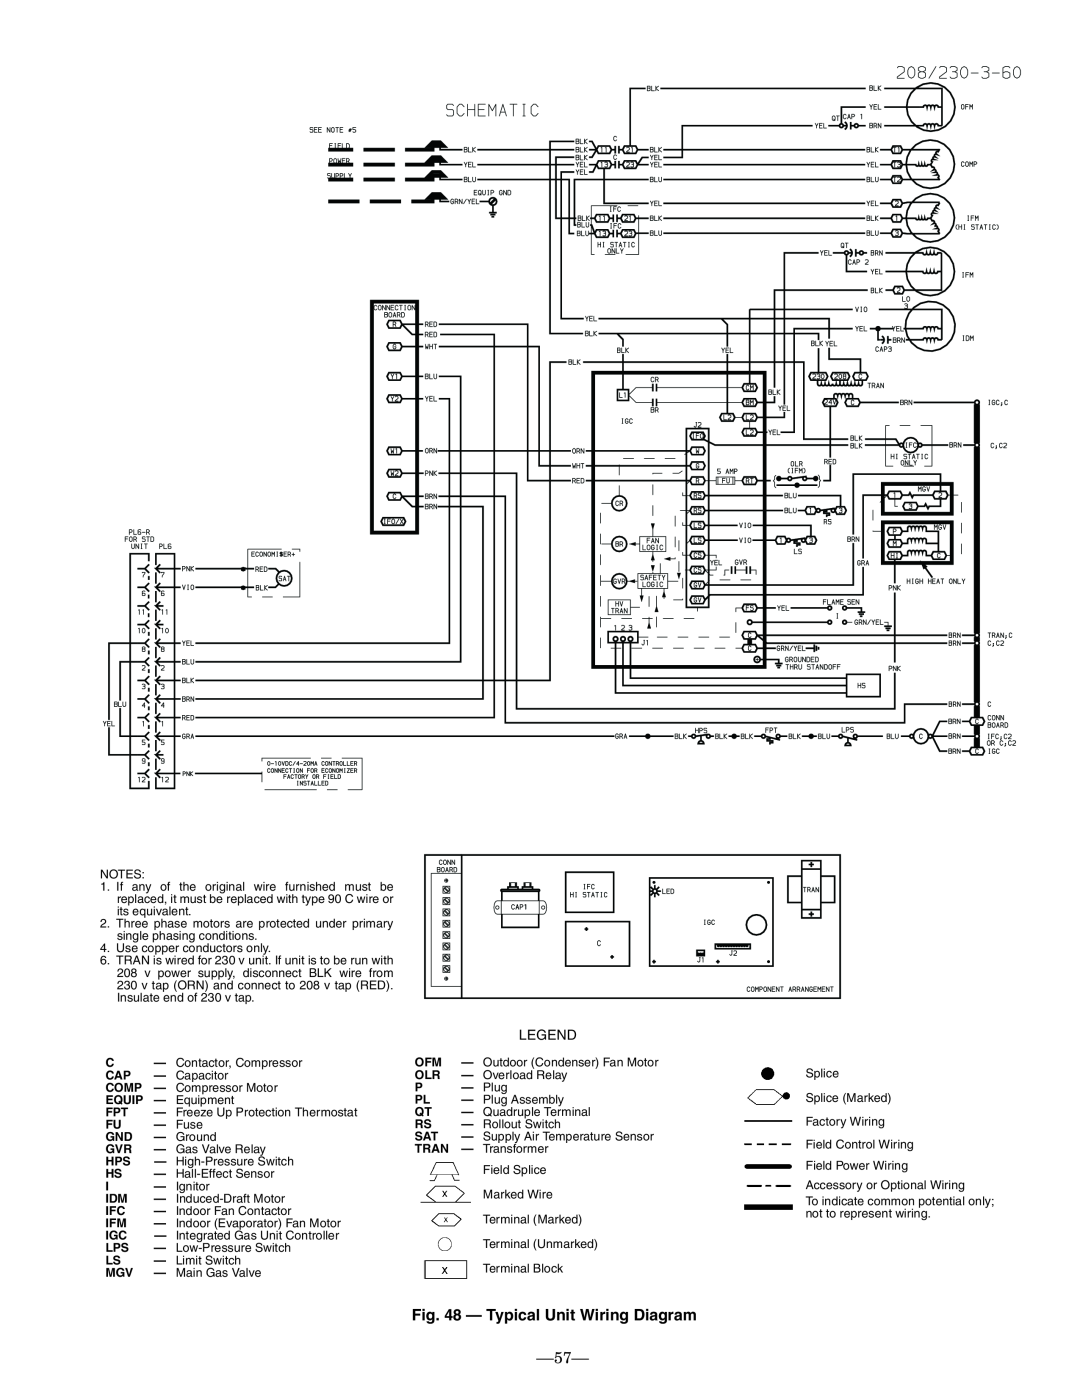 Bryant 580F installation instructions Typical Unit Wiring Diagram 